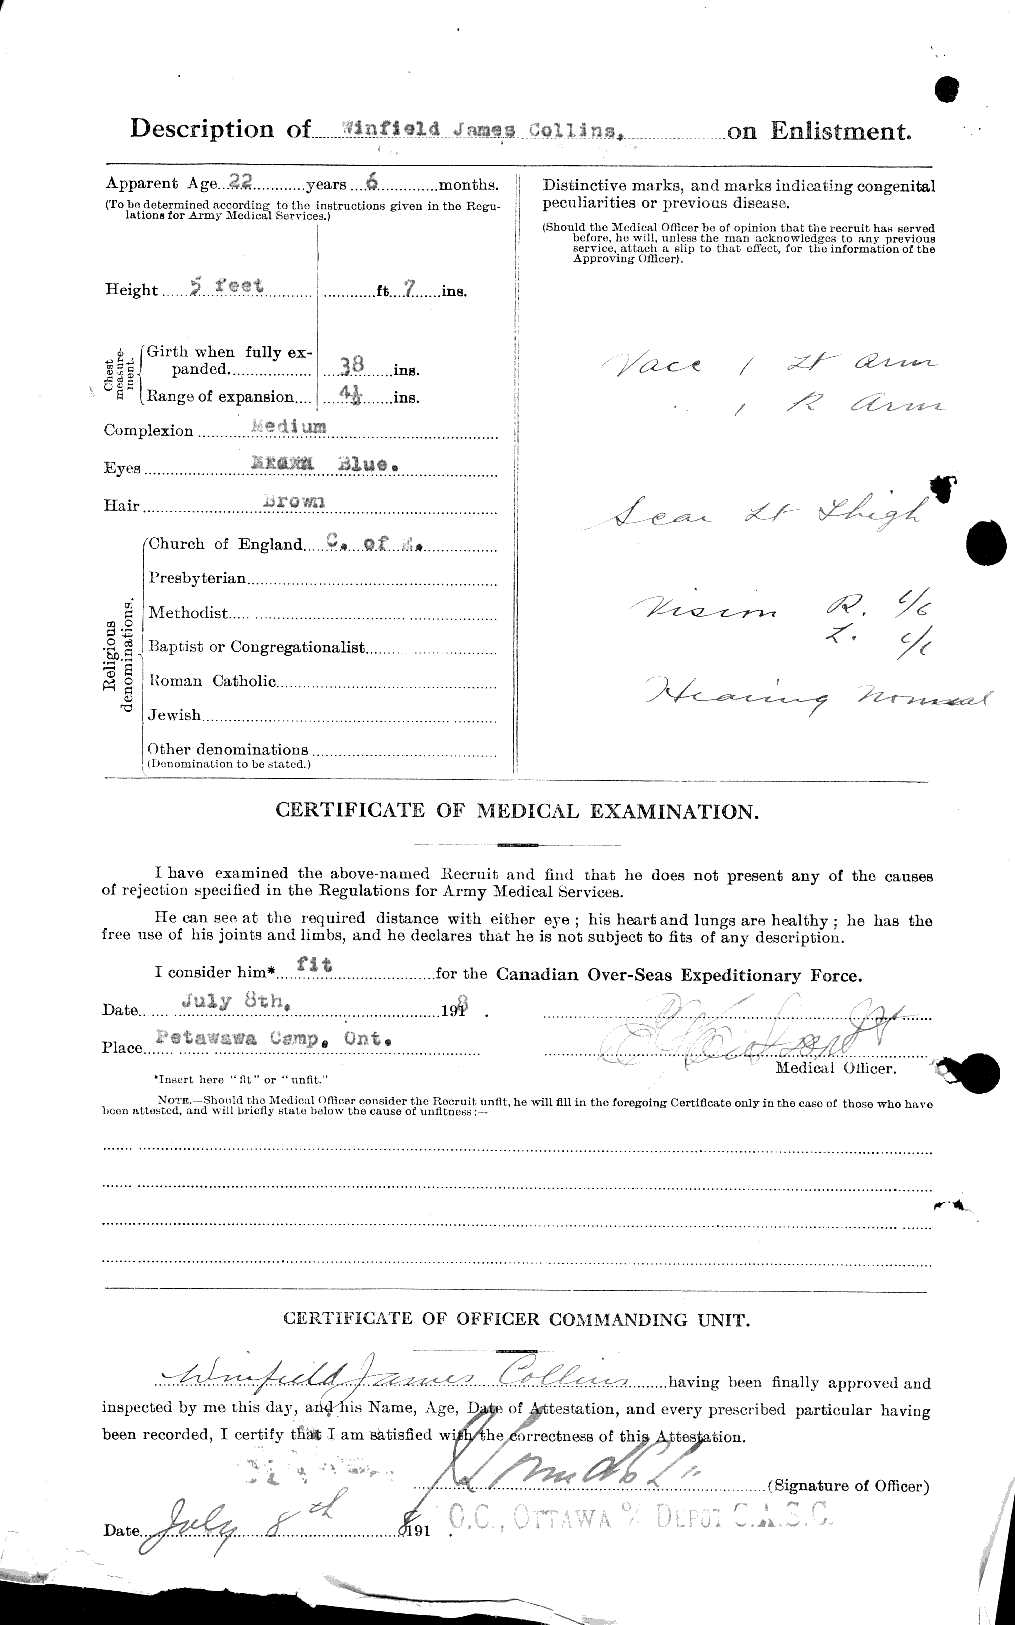 Personnel Records of the First World War - CEF 034640b